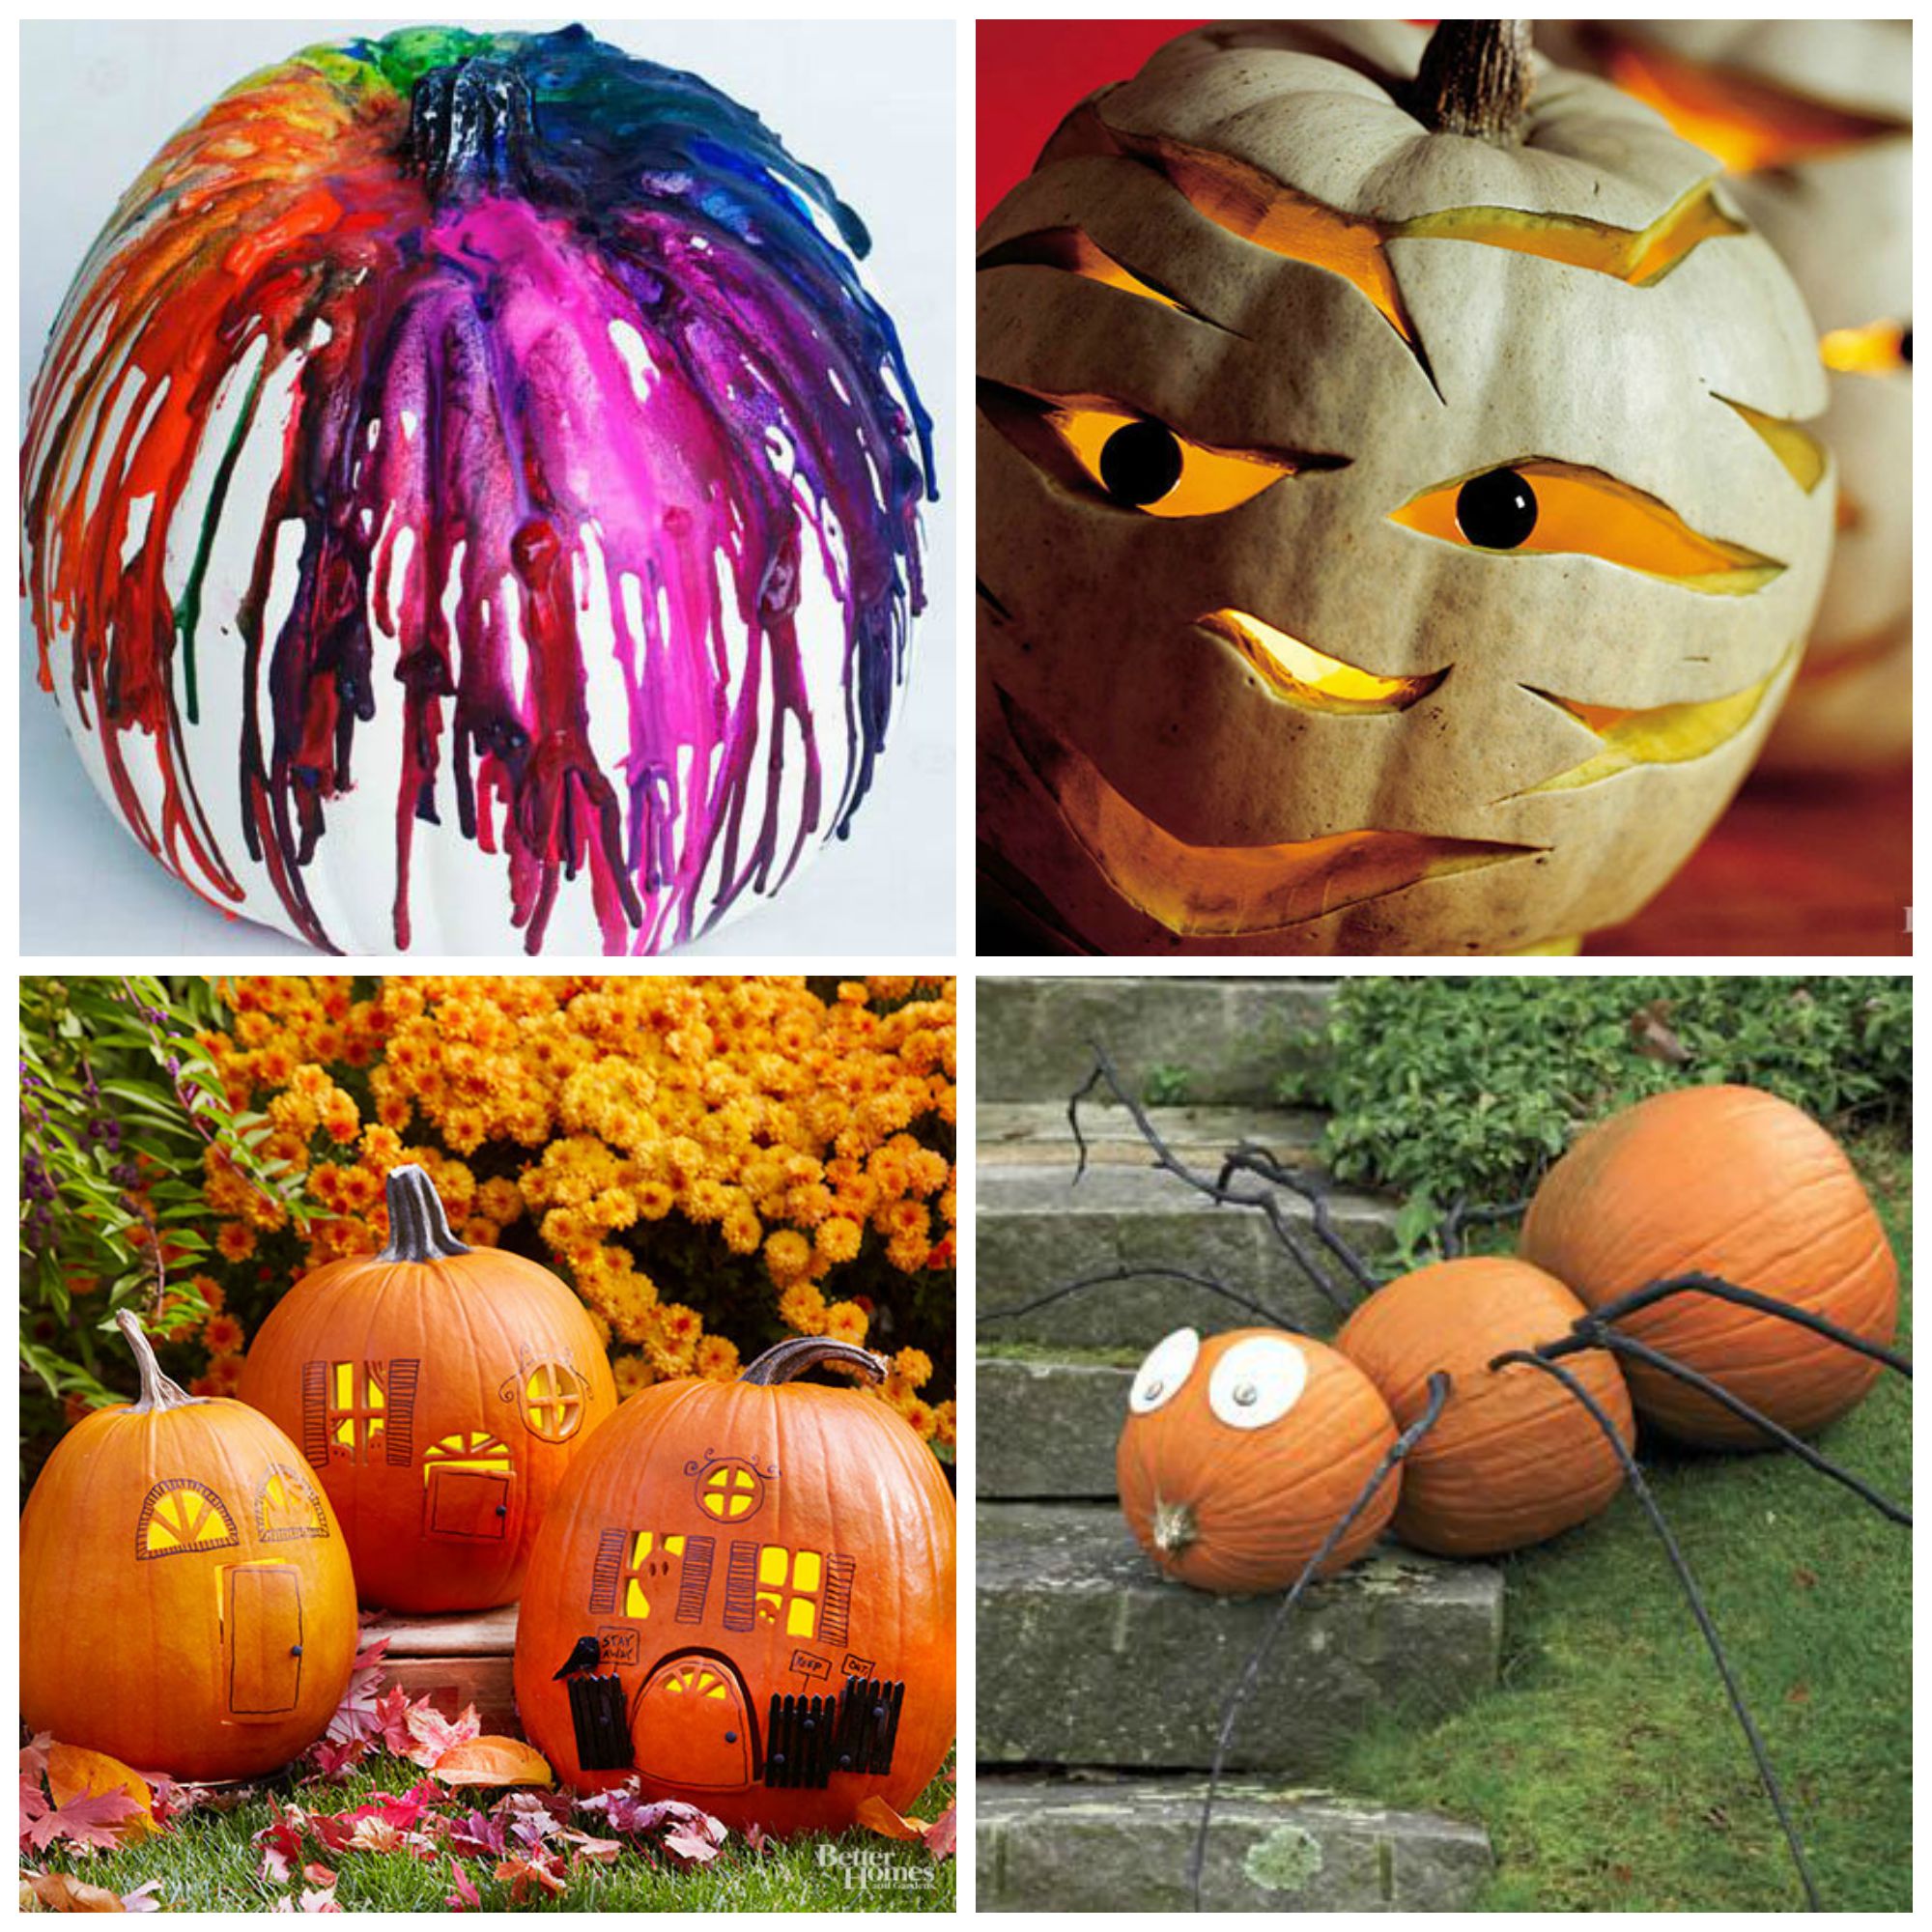 20 Awesome Ways To Decorate Your Pumpkin | Fun With Kids